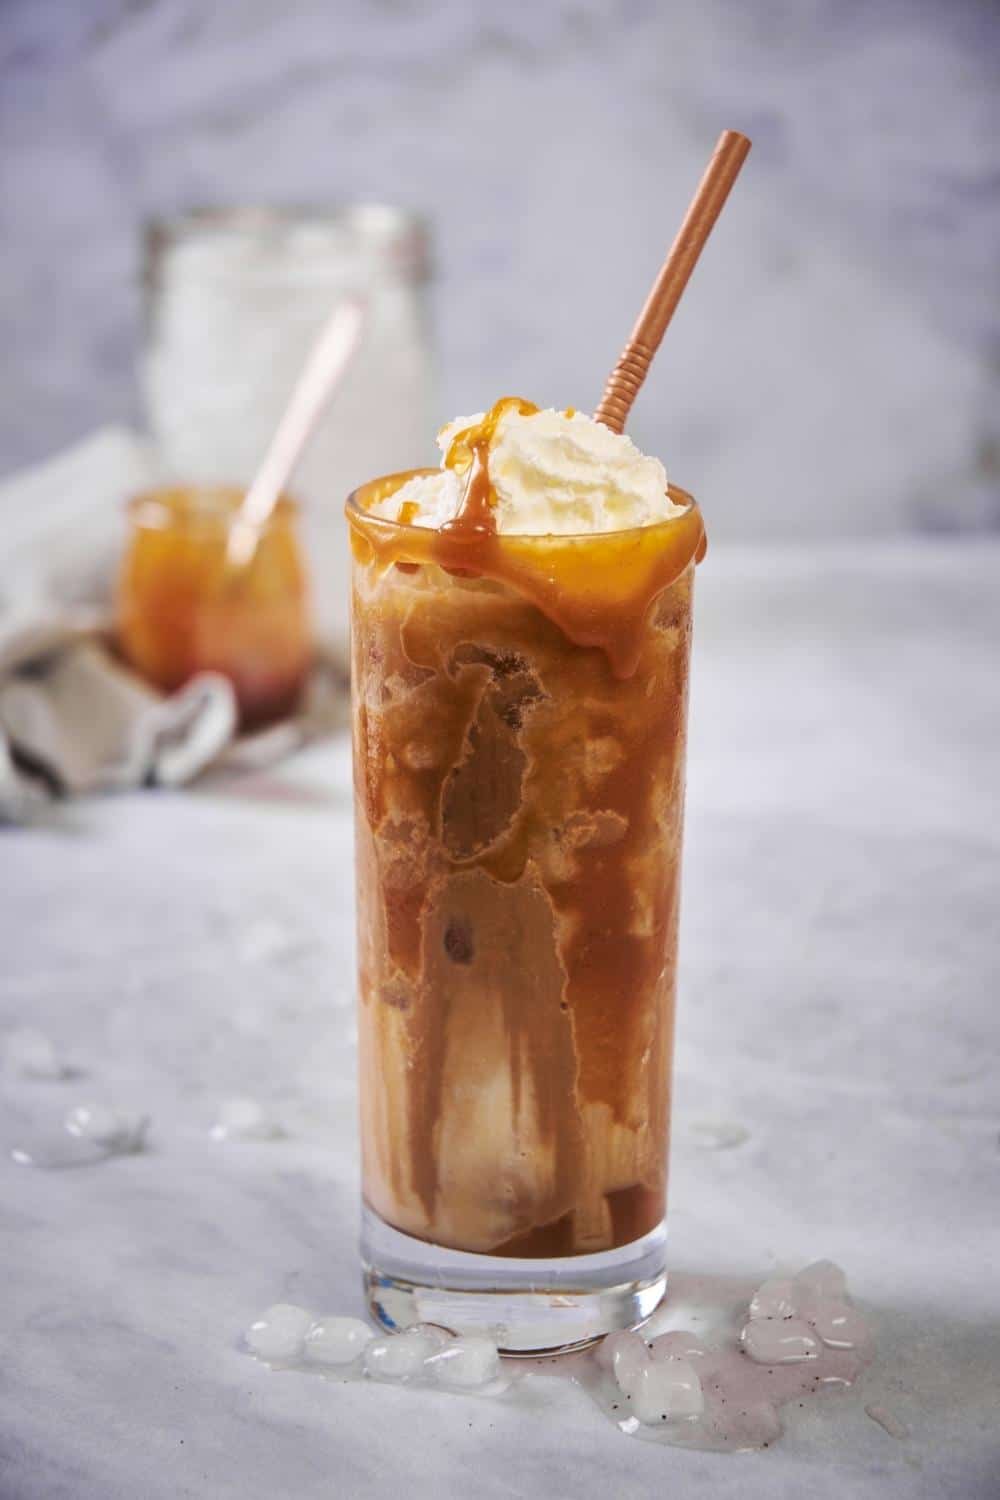 A tall glass of iced caramel macchiato with a brown straw. The coffee and milk has been mixed together and the glass is topped with whipped cream and caramel. Small pieces of melting ice are scattered on the countertop and jars of ice and caramel can be seen far in the back.